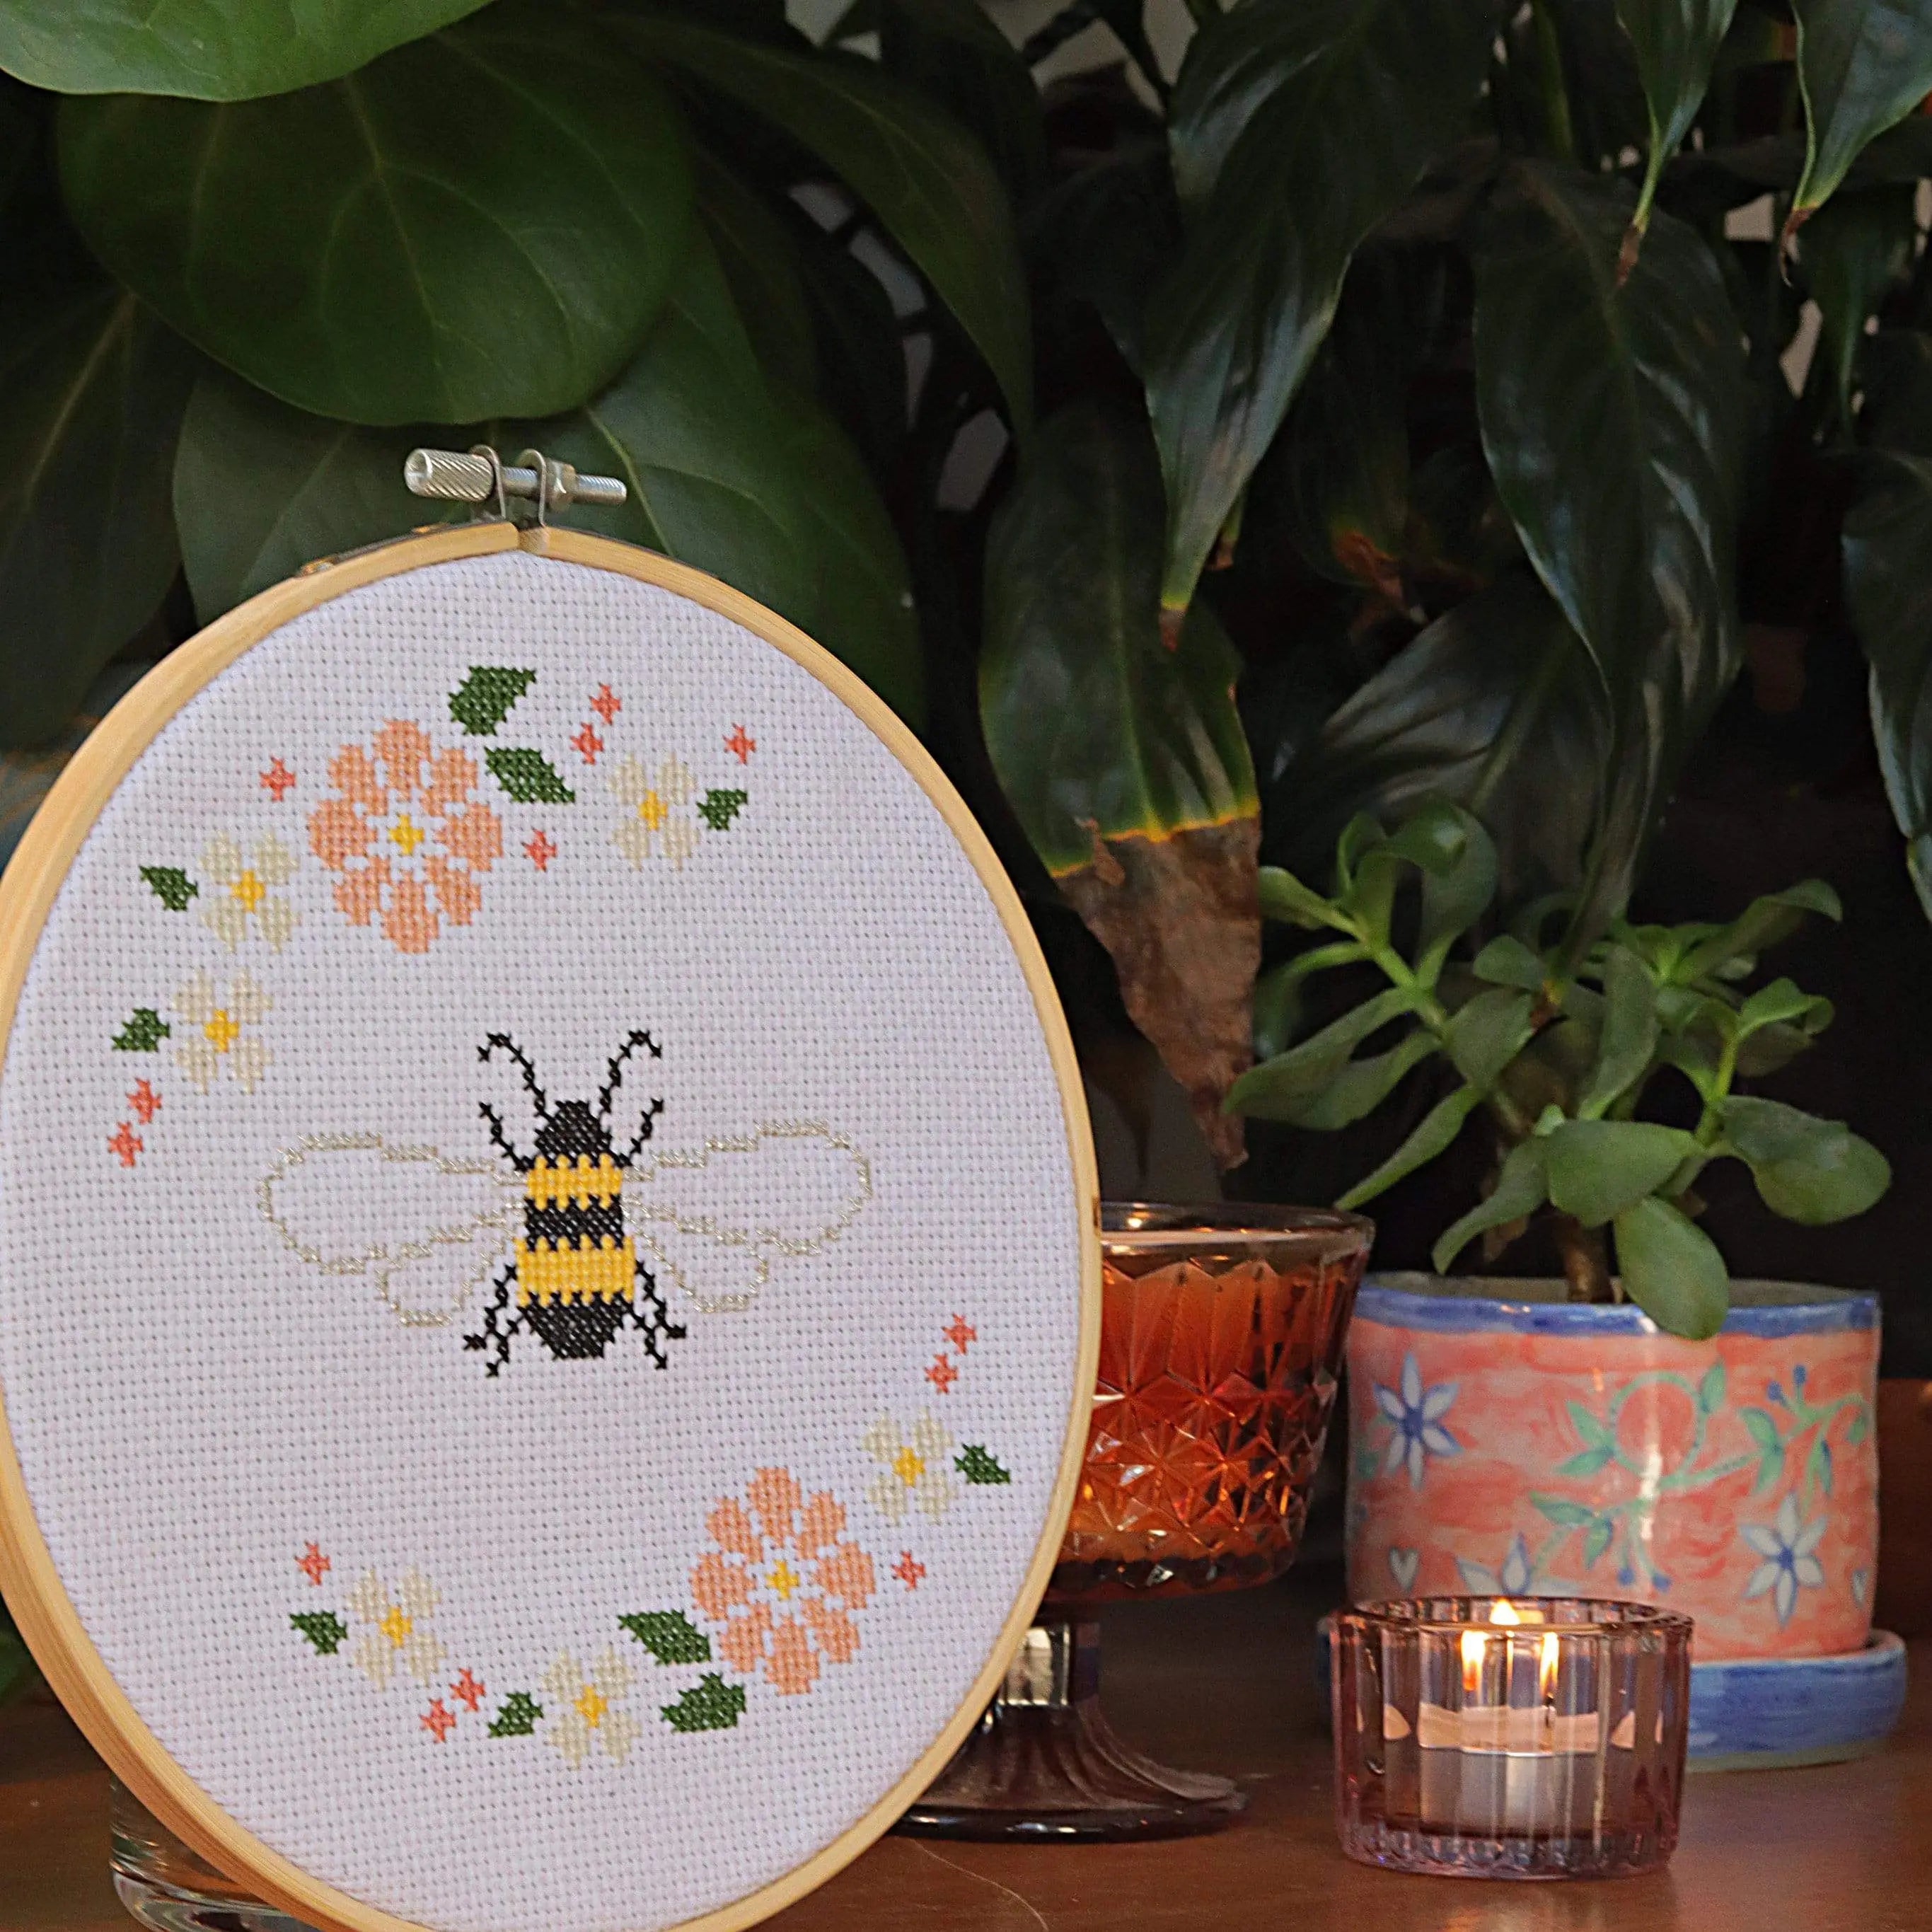 Craft Club Co BEE & BLOSSOM Cross Stitch Kit. Side view of the design, showing a candle and pot plant next to it.